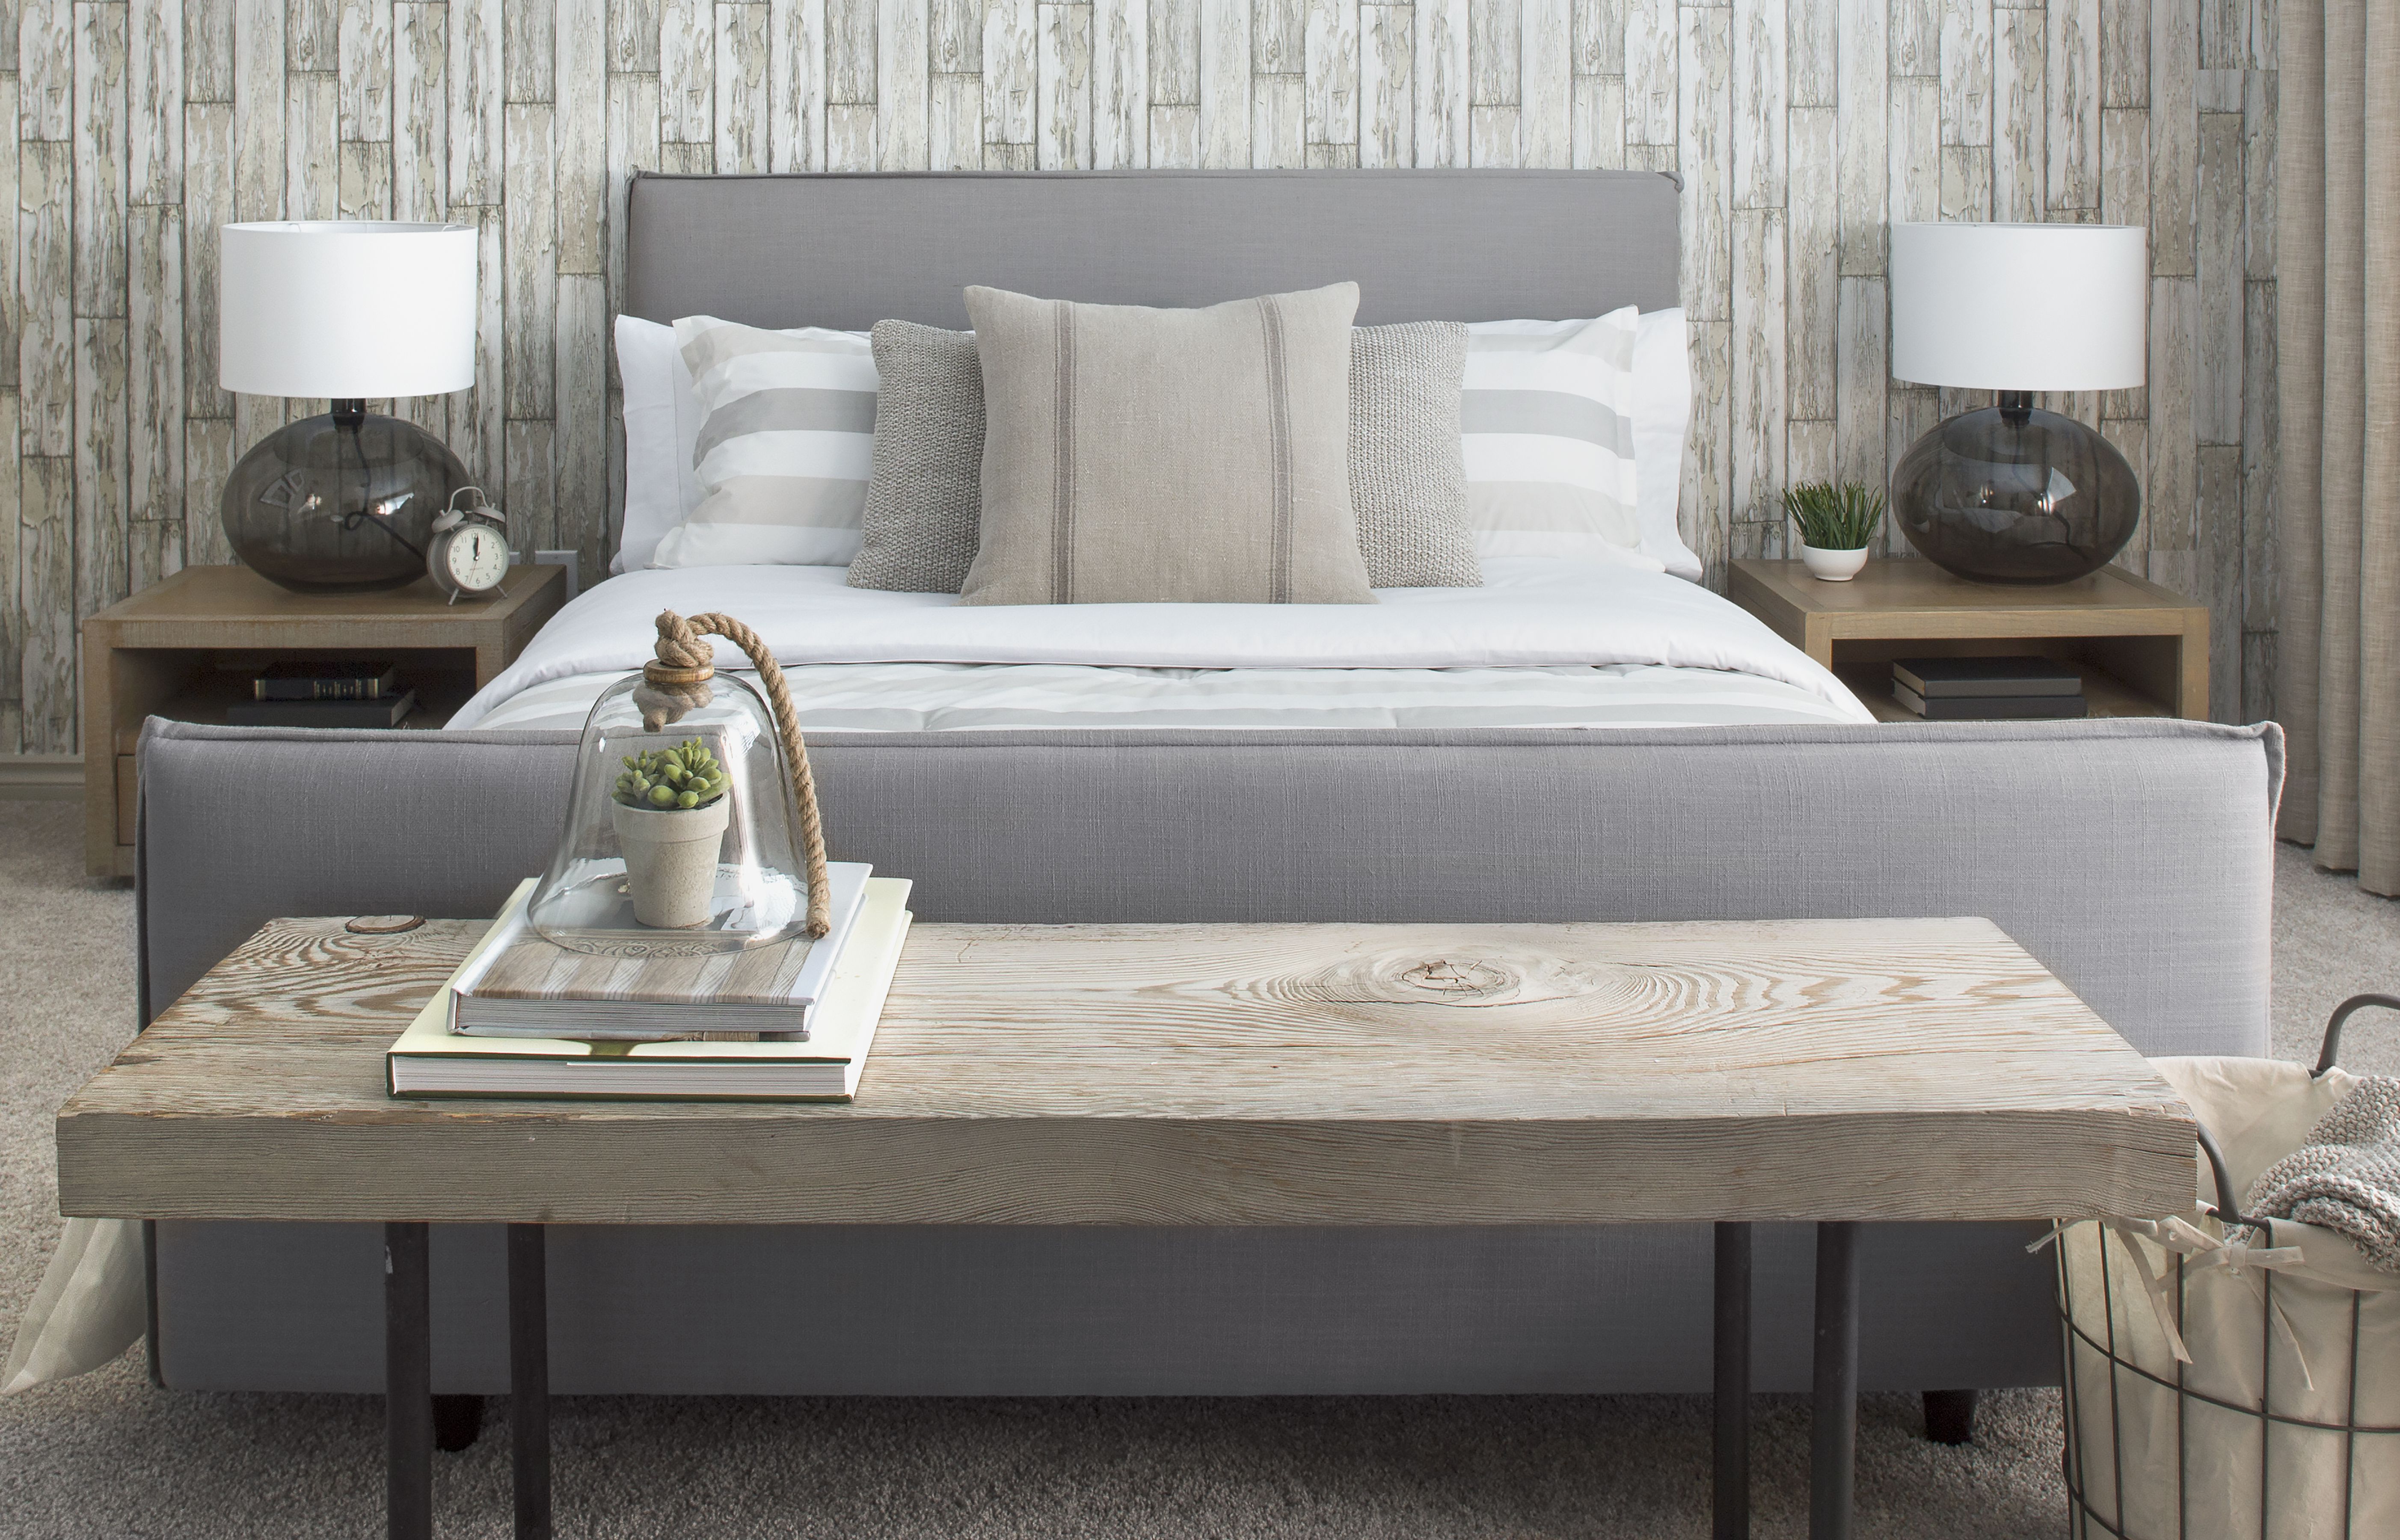 10 Great Furniture Ideas for the Space at the Foot of Your Bed